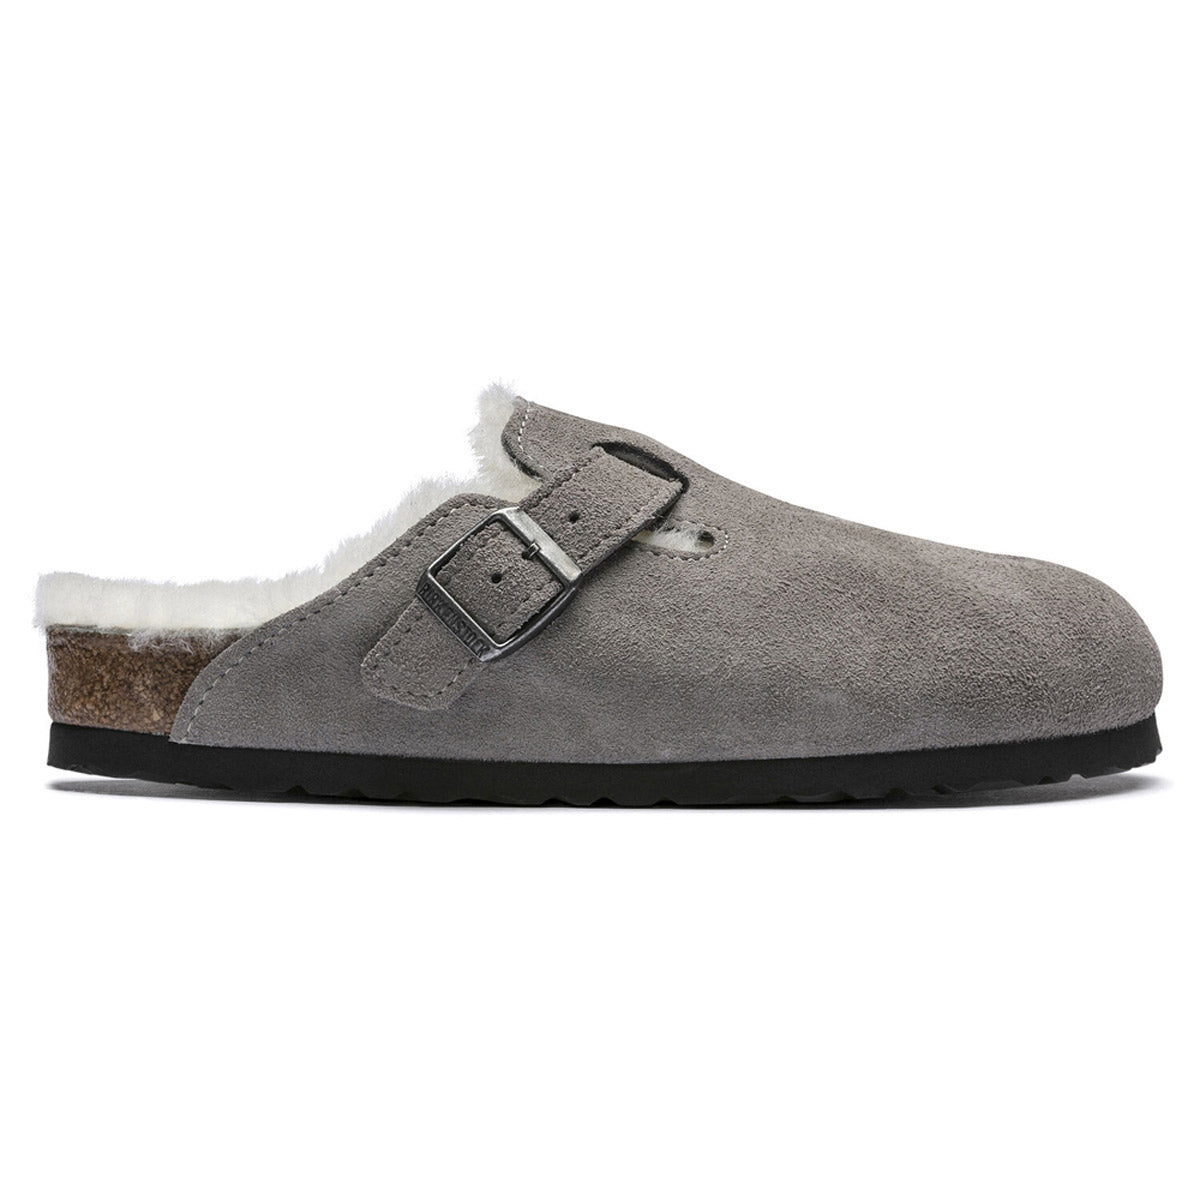 Gray suede Birkenstock Boston Shearling Stone Coin clog slipper with a shearling lining and buckle detail.